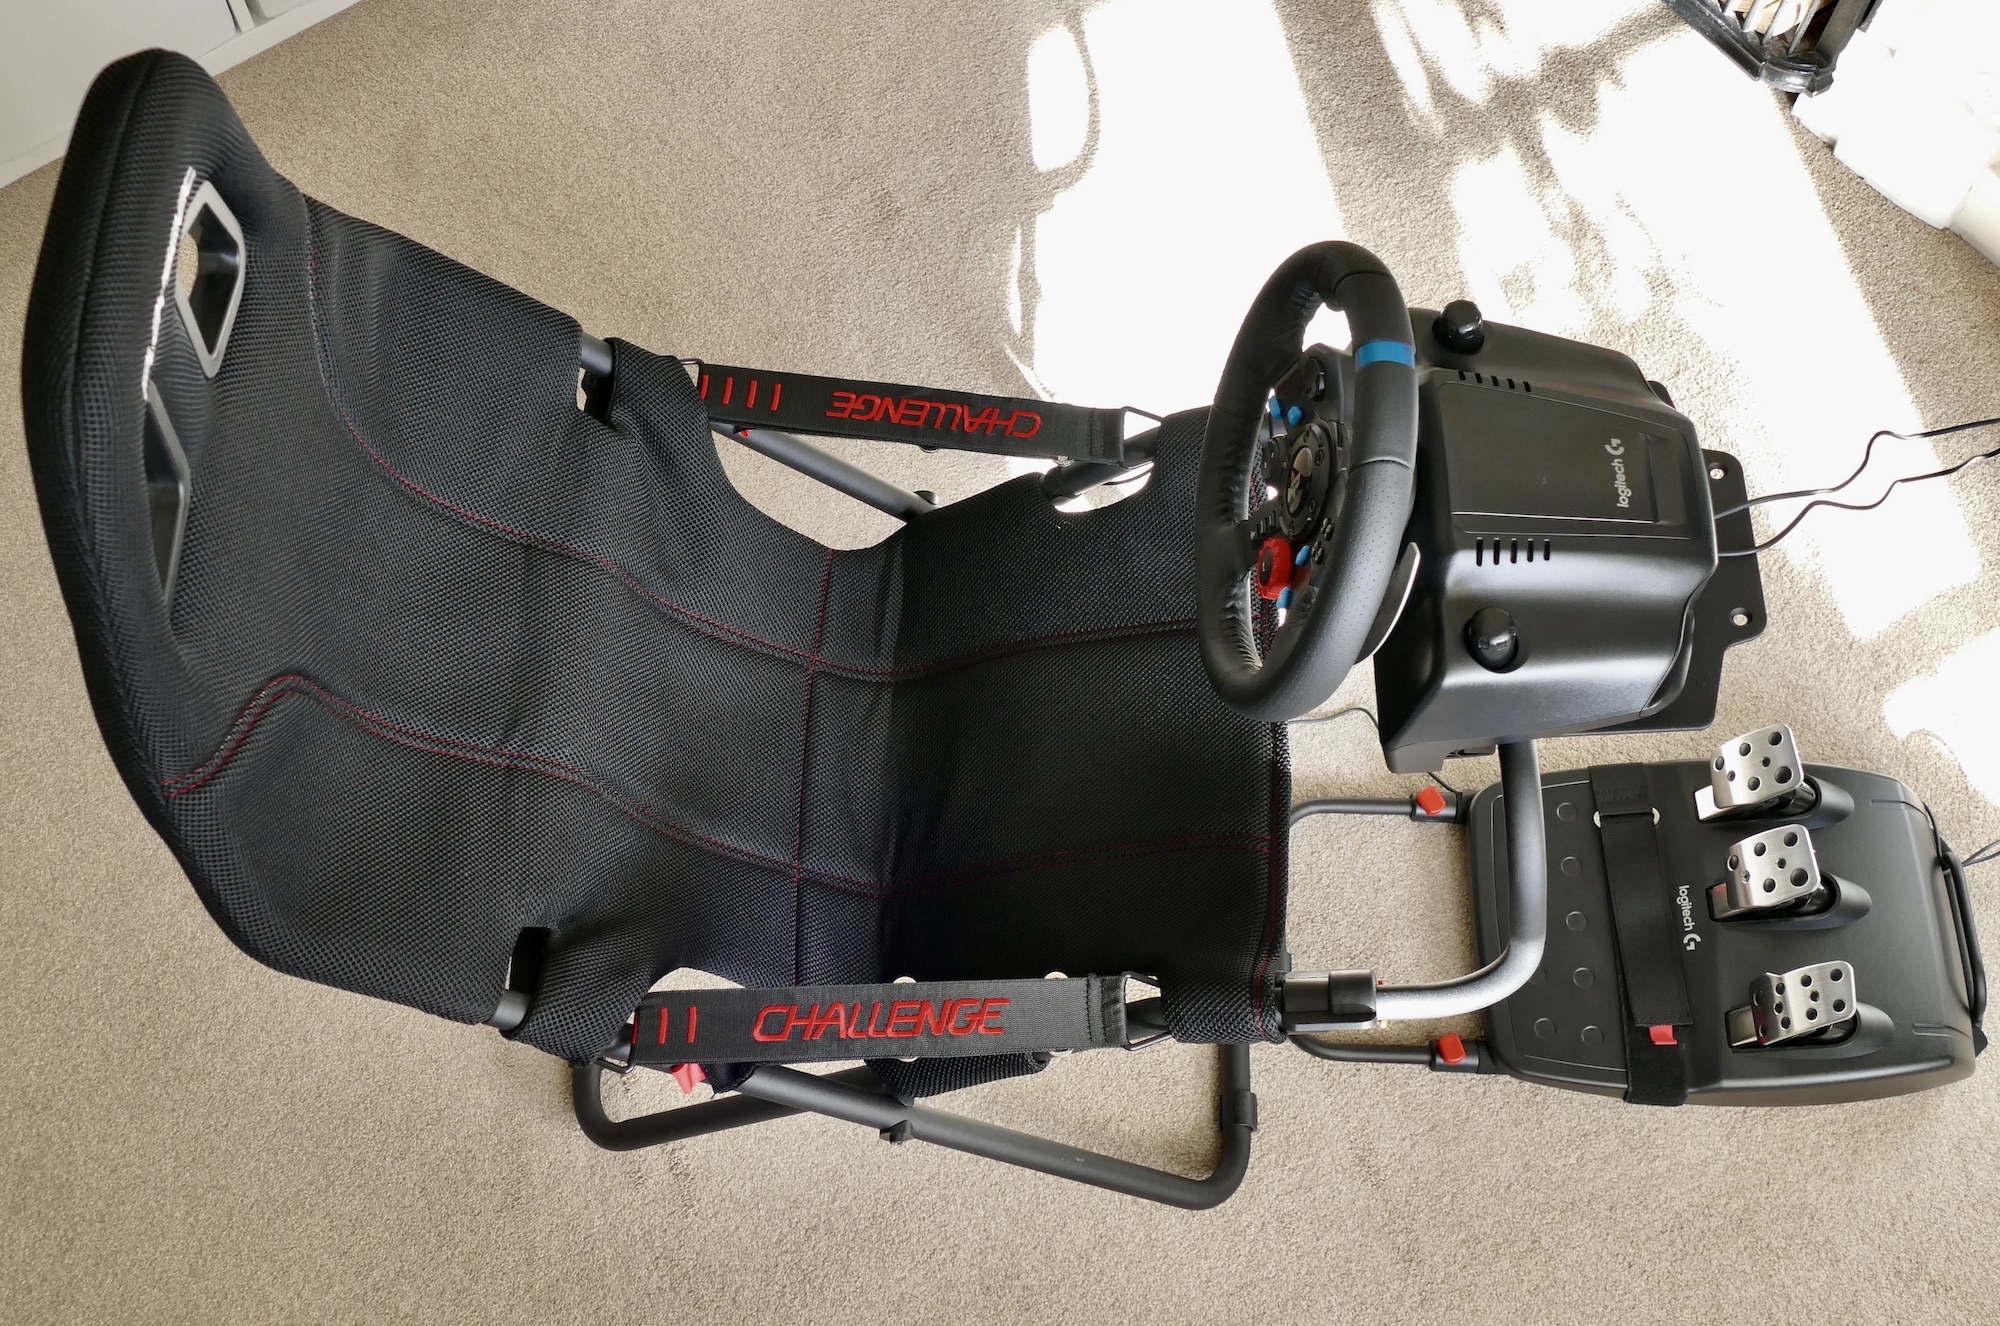 The PlaySeat Challenge and the Logitech G29 steering wheel viewed from above.